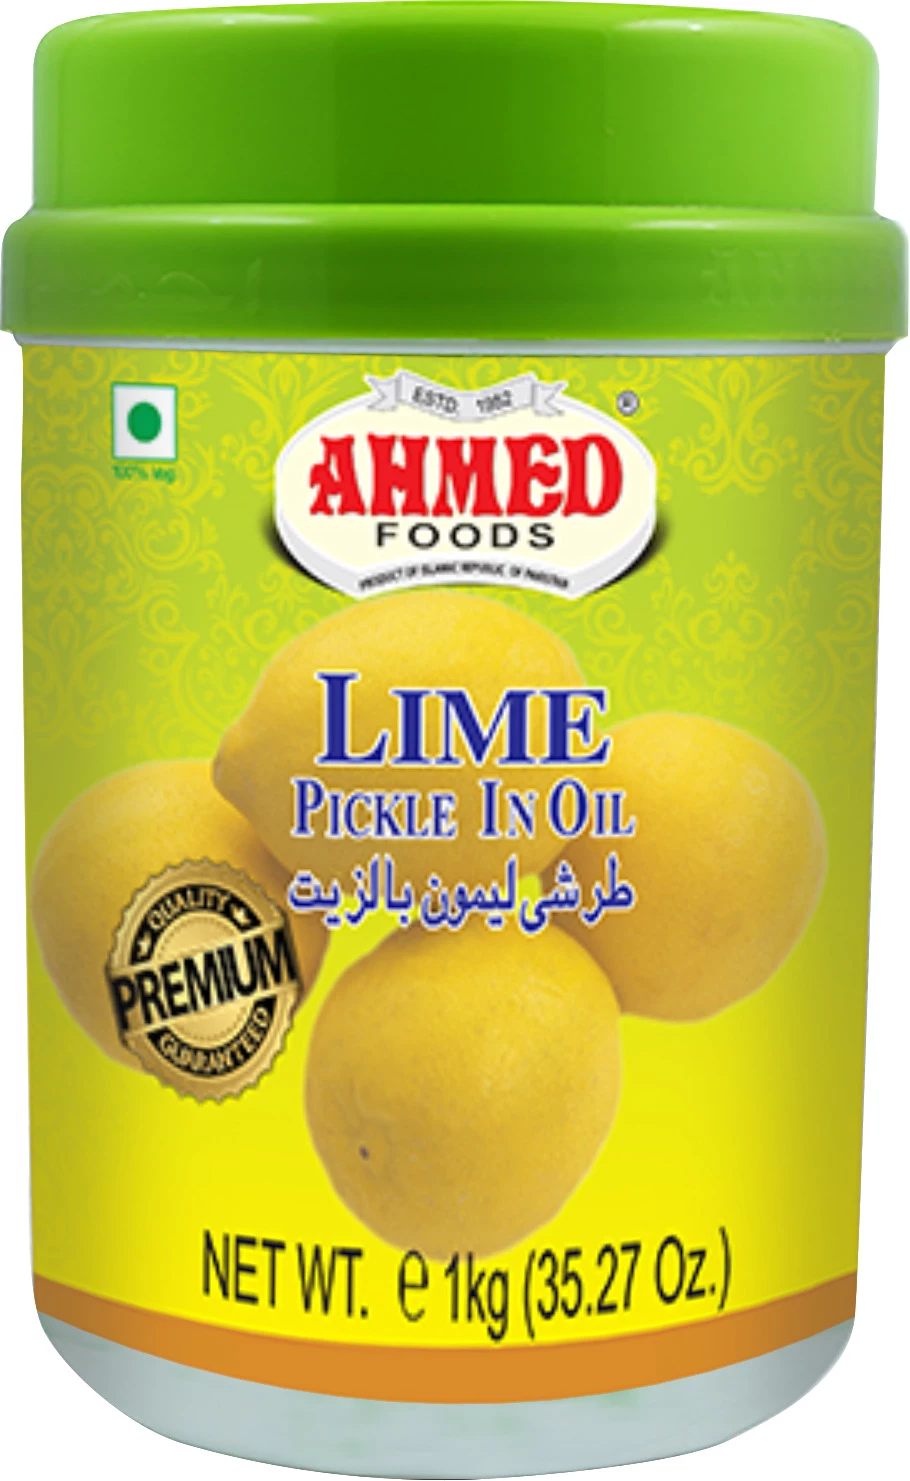 Lime Pickle With Oil 6 X 1 Kg - Ahmed